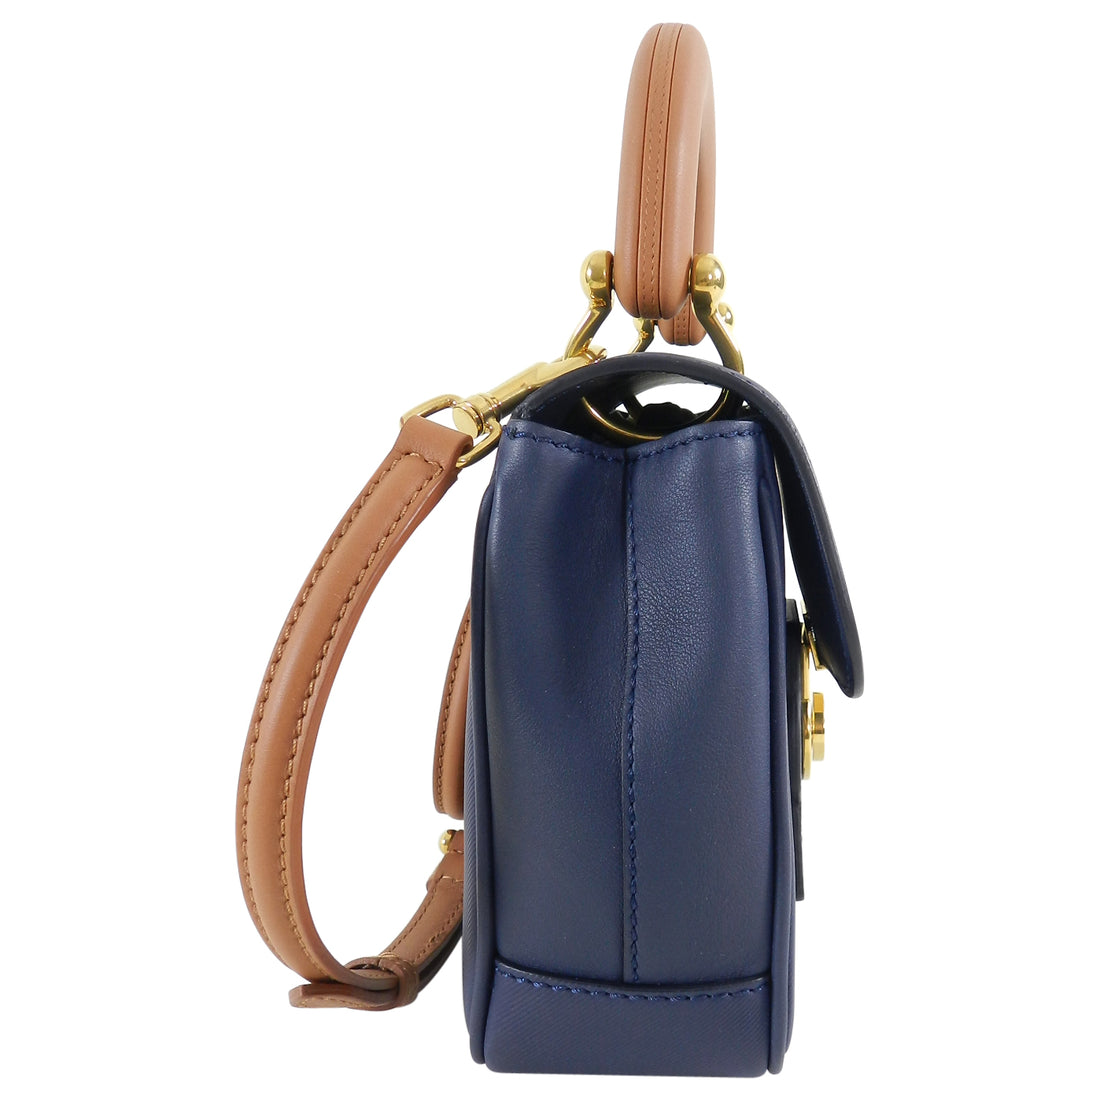 Burberry DK88 Small Top Handle Bag in Ink Blue